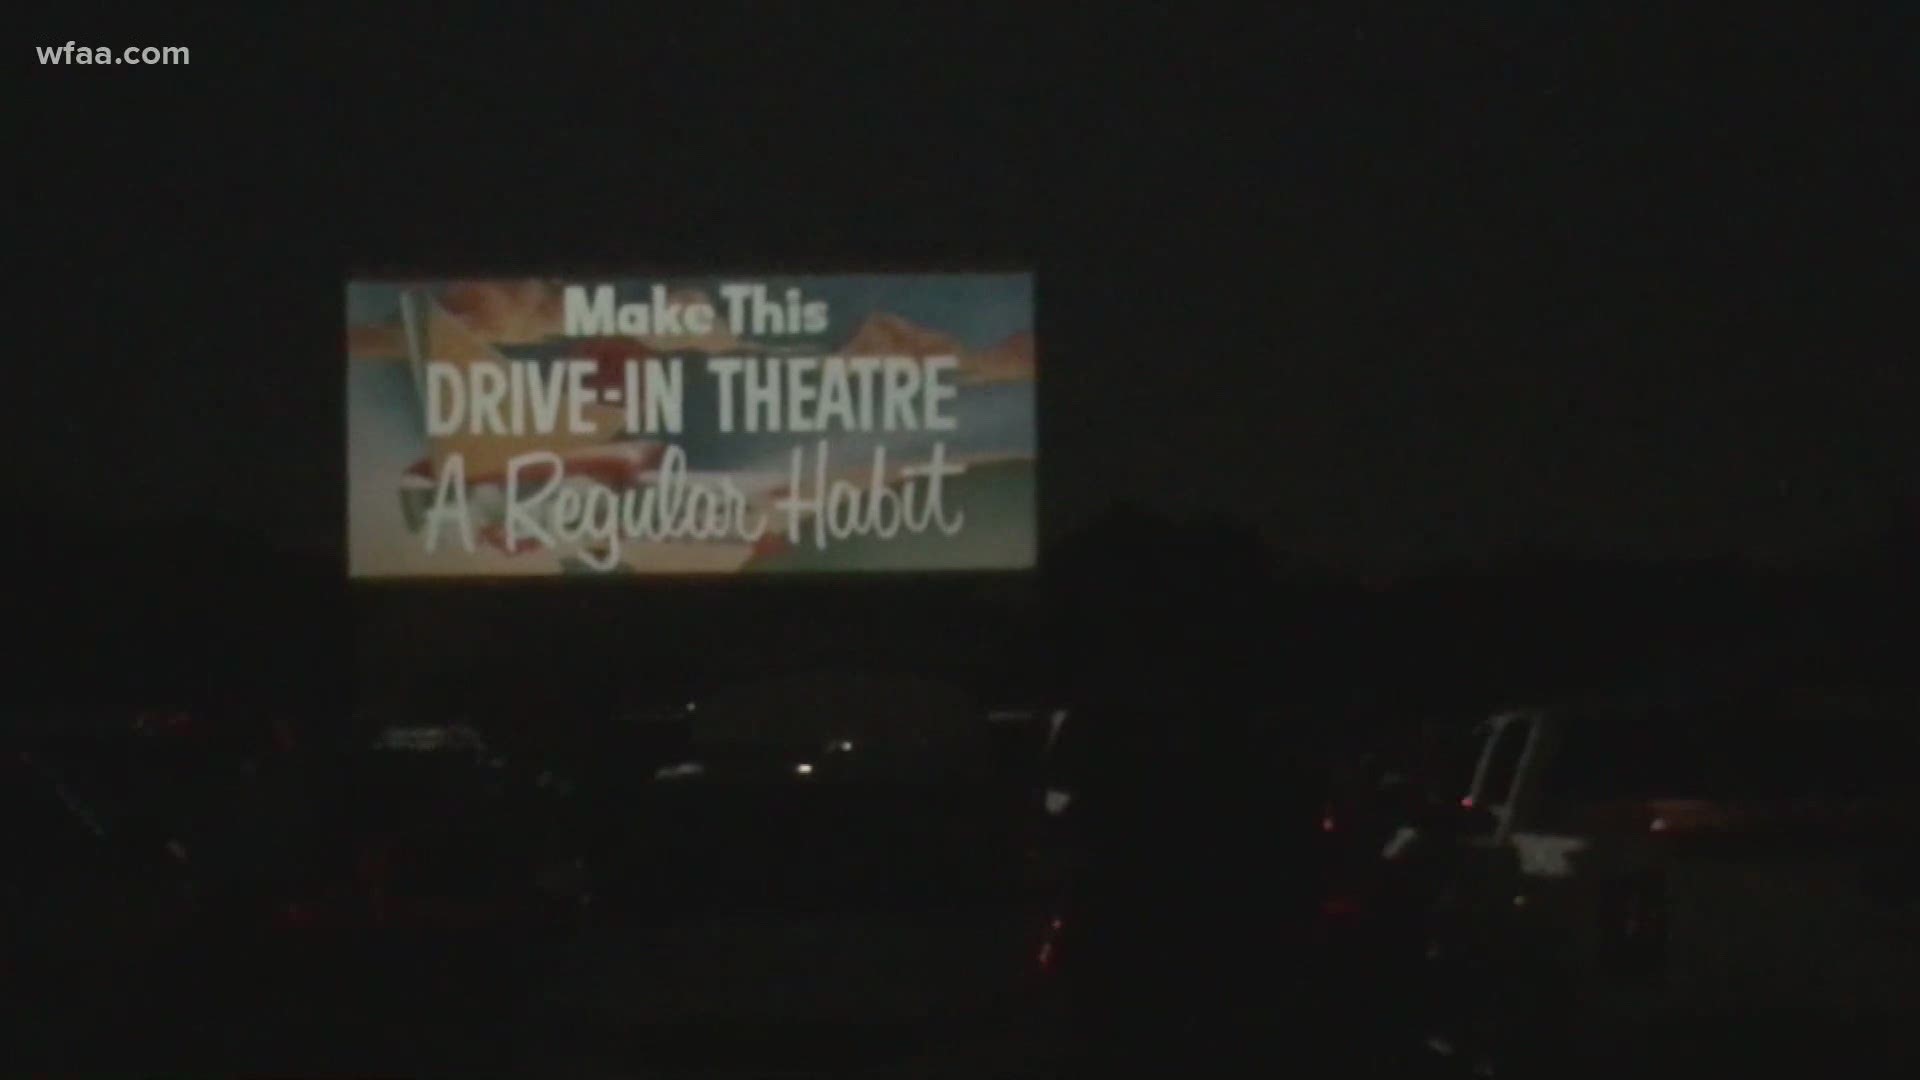 Old WFAA stories preserved in the Jones Film Collection at SMU chronicle the slow decline of area drive-ins in the Dallas-Fort Worth area before COVID-19.